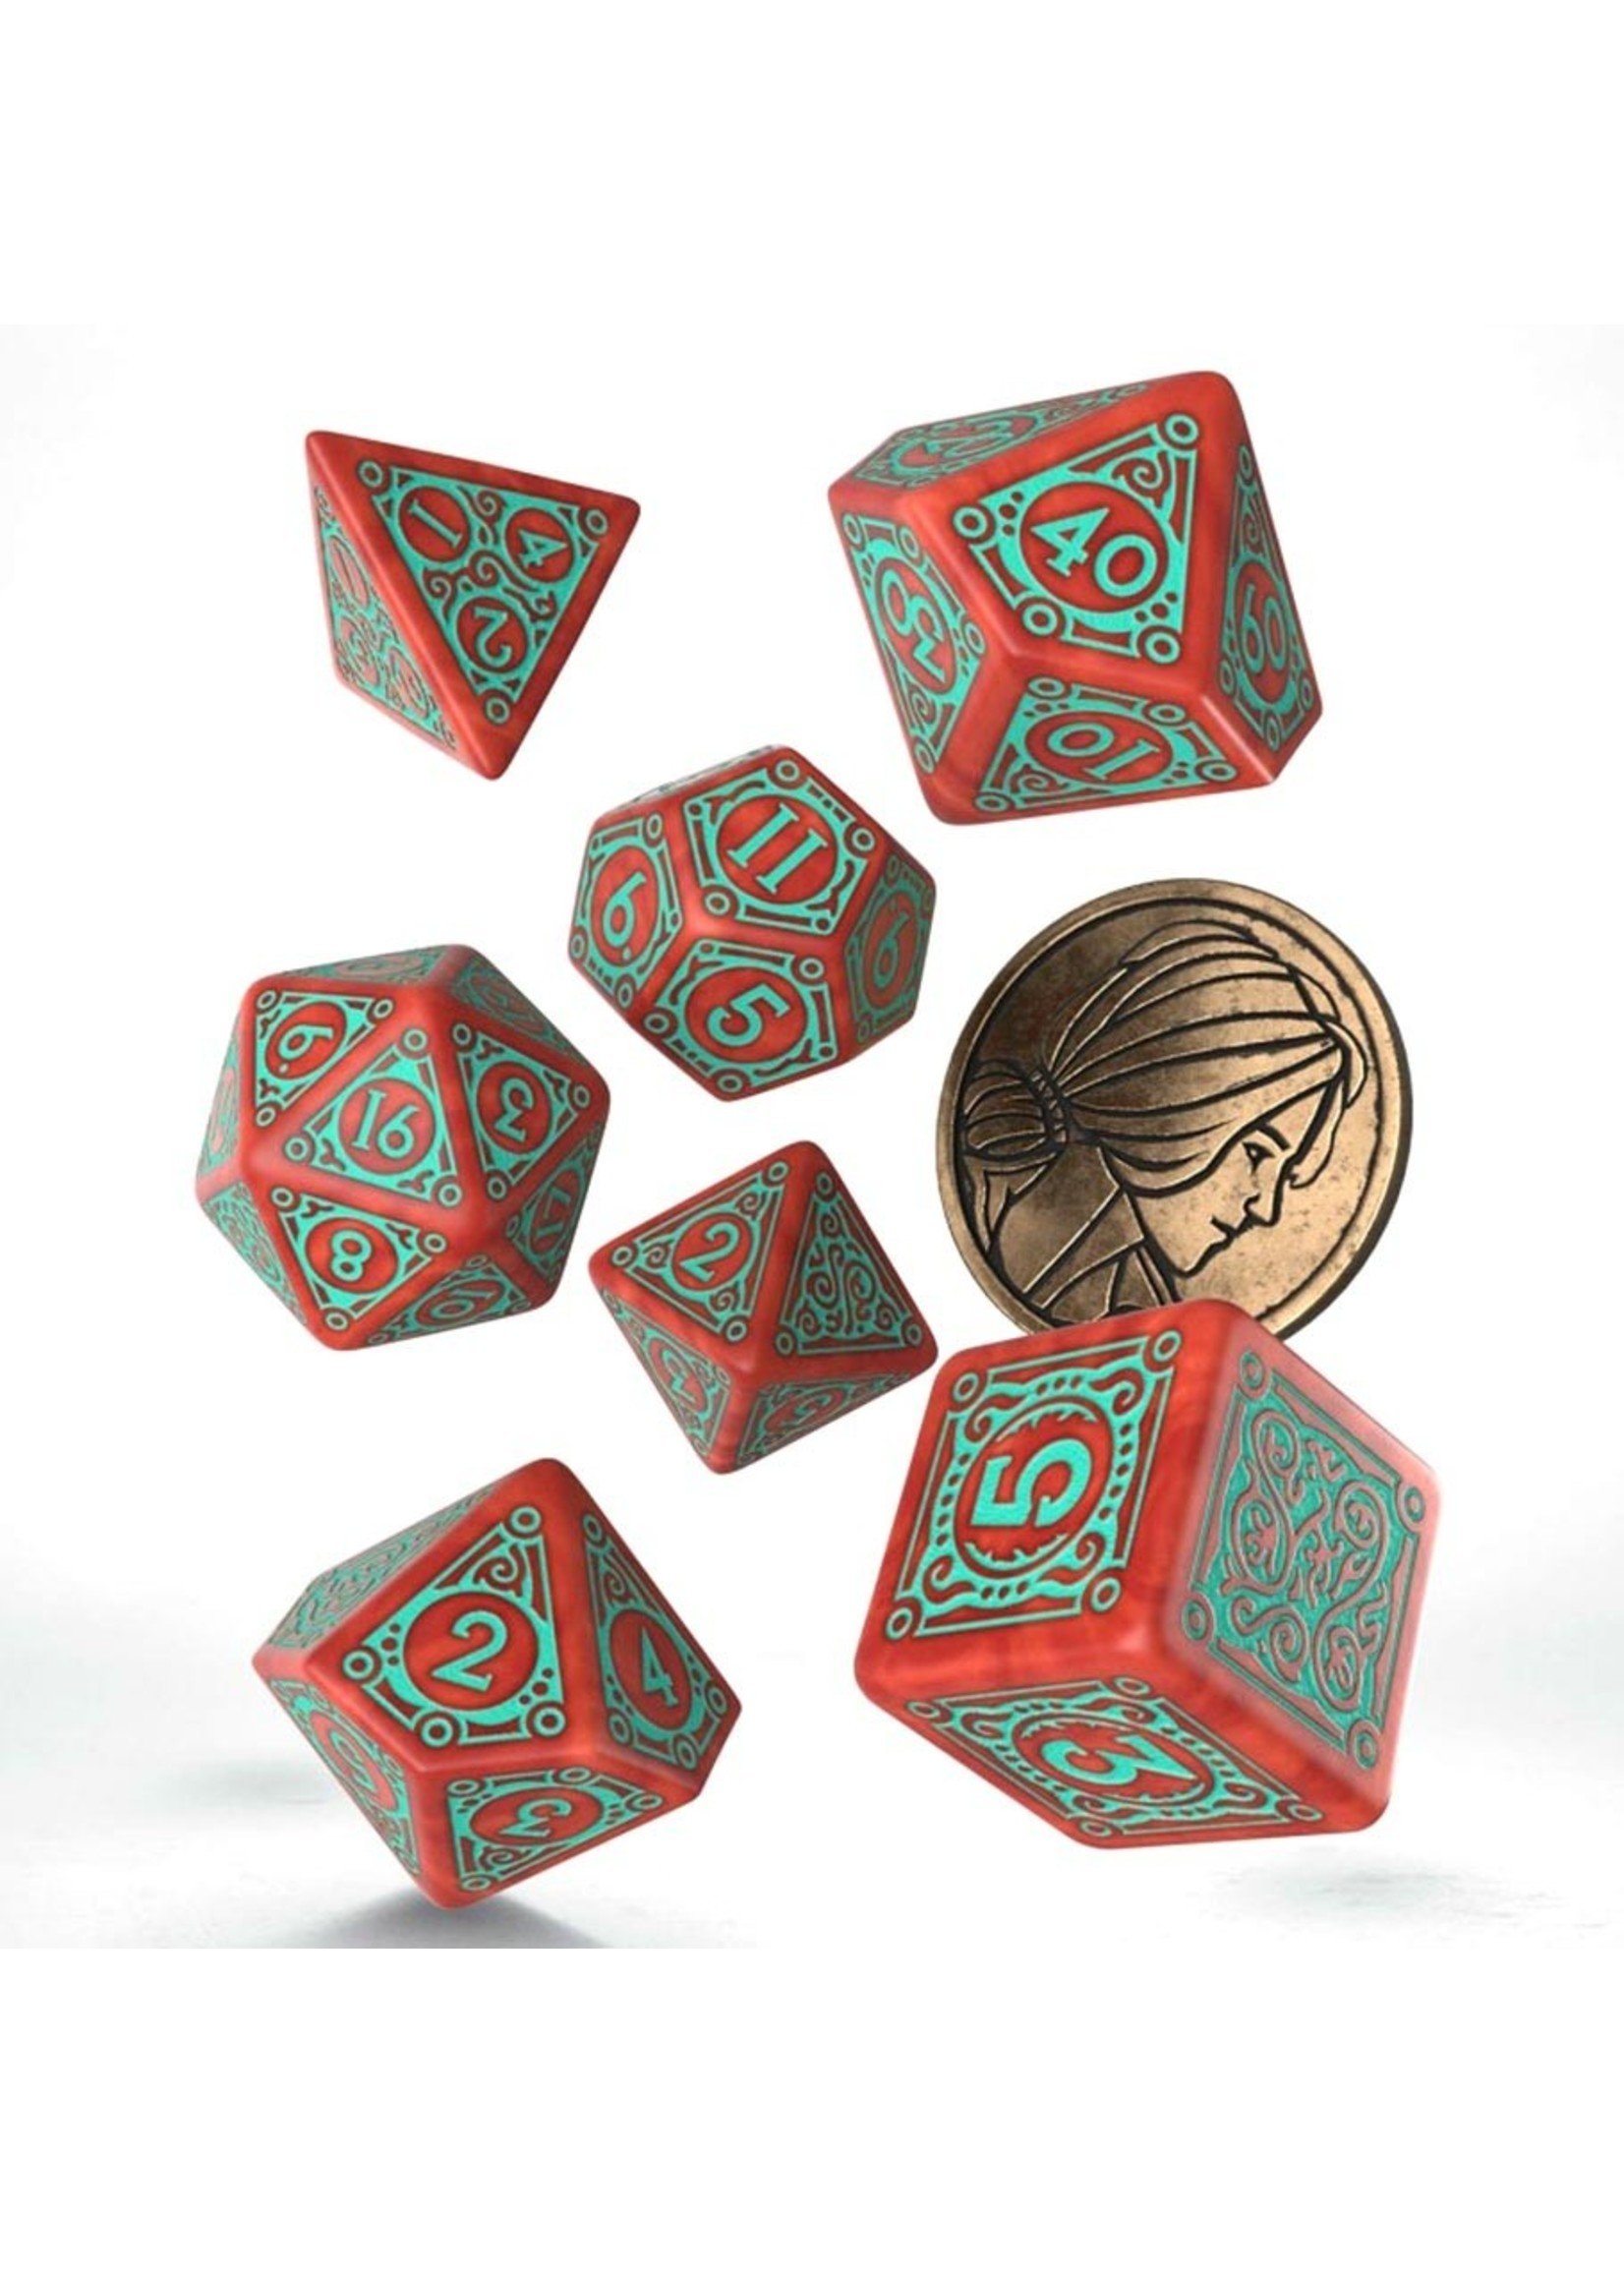 R. Talsorian Games The Witcher Dice Set: Triss - Merigold the Fear